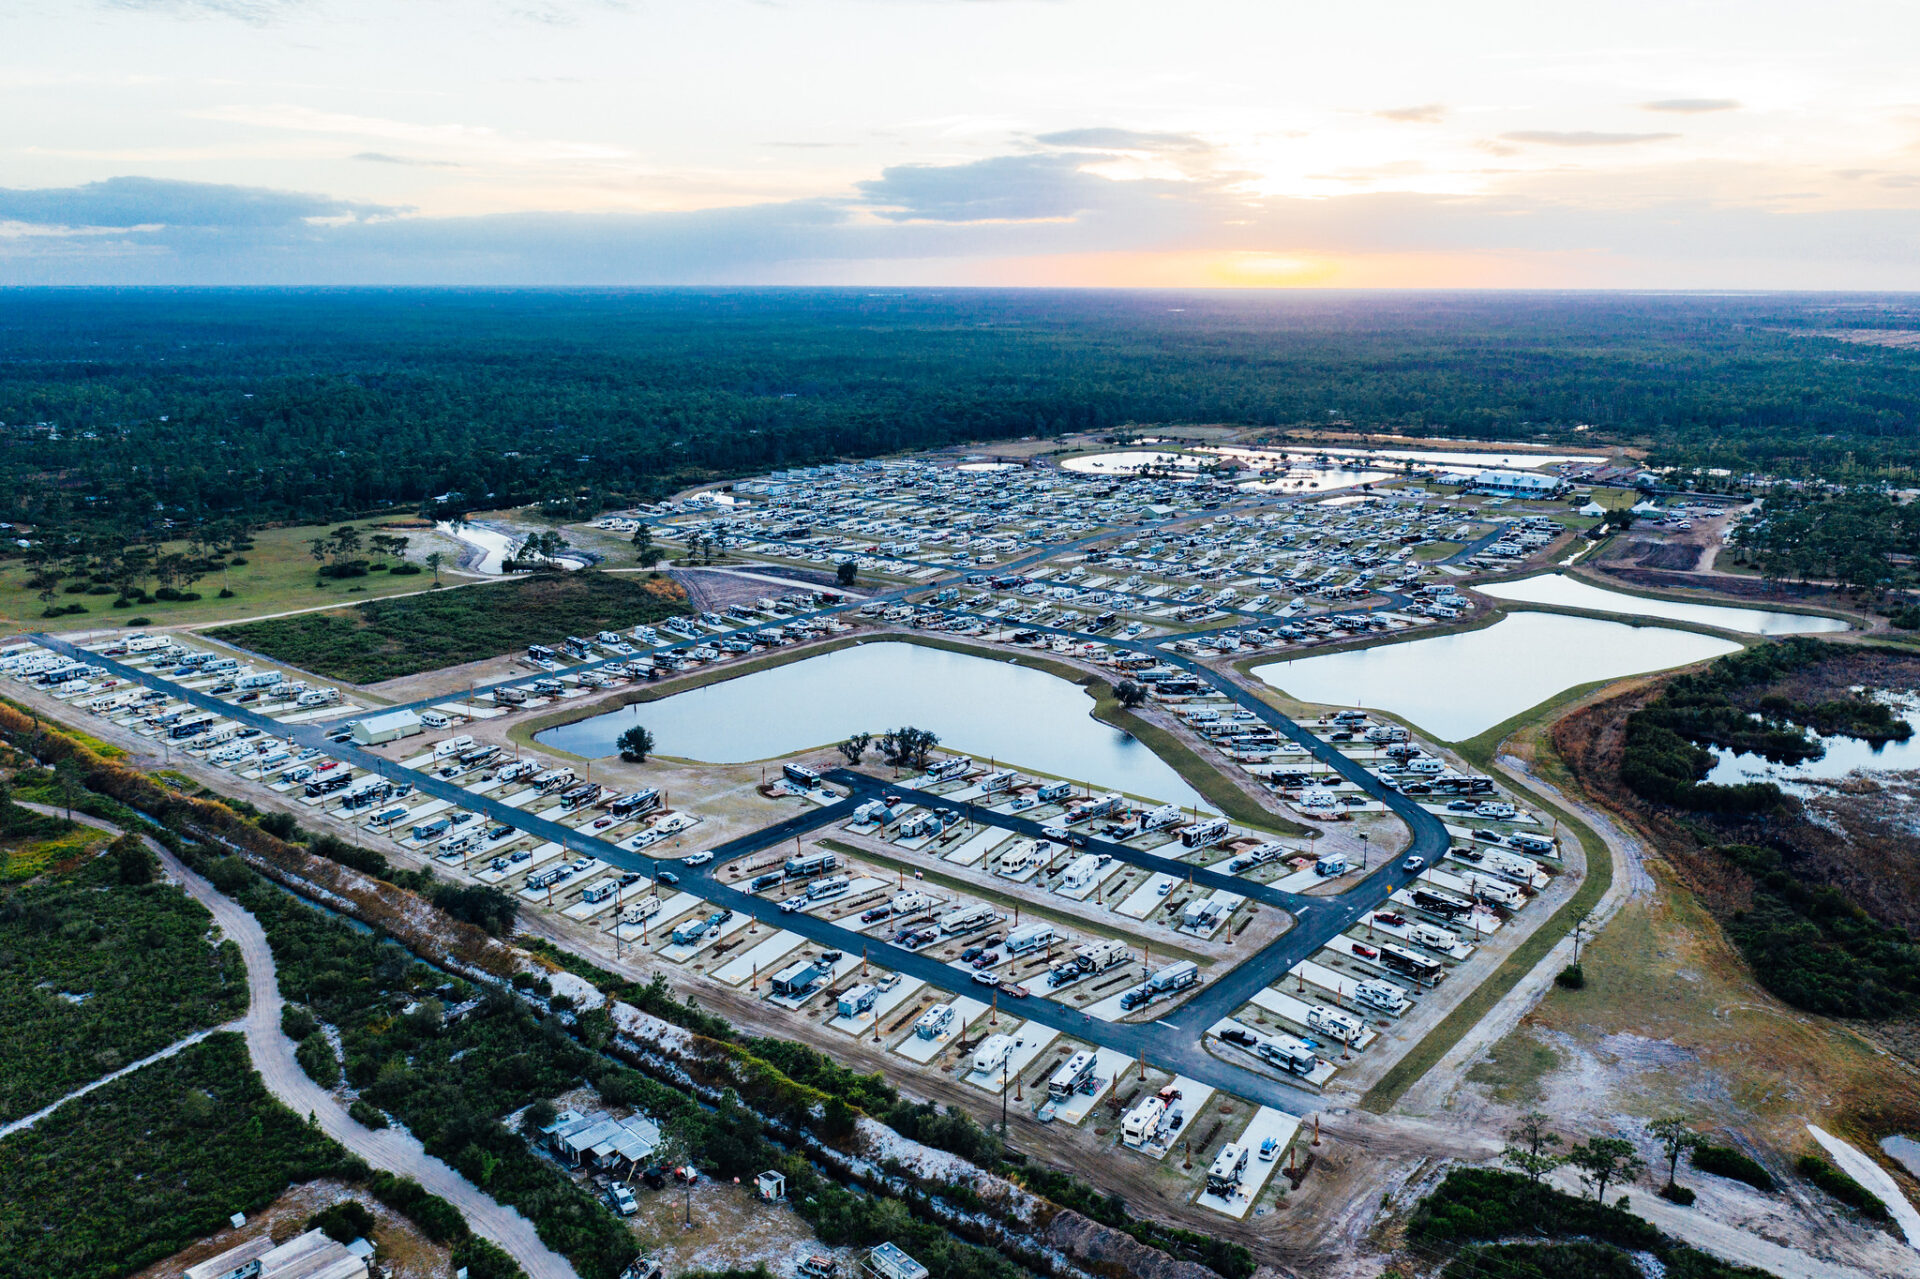 7000 Campsites Under Construction in Florida Can’t Come Too Soon